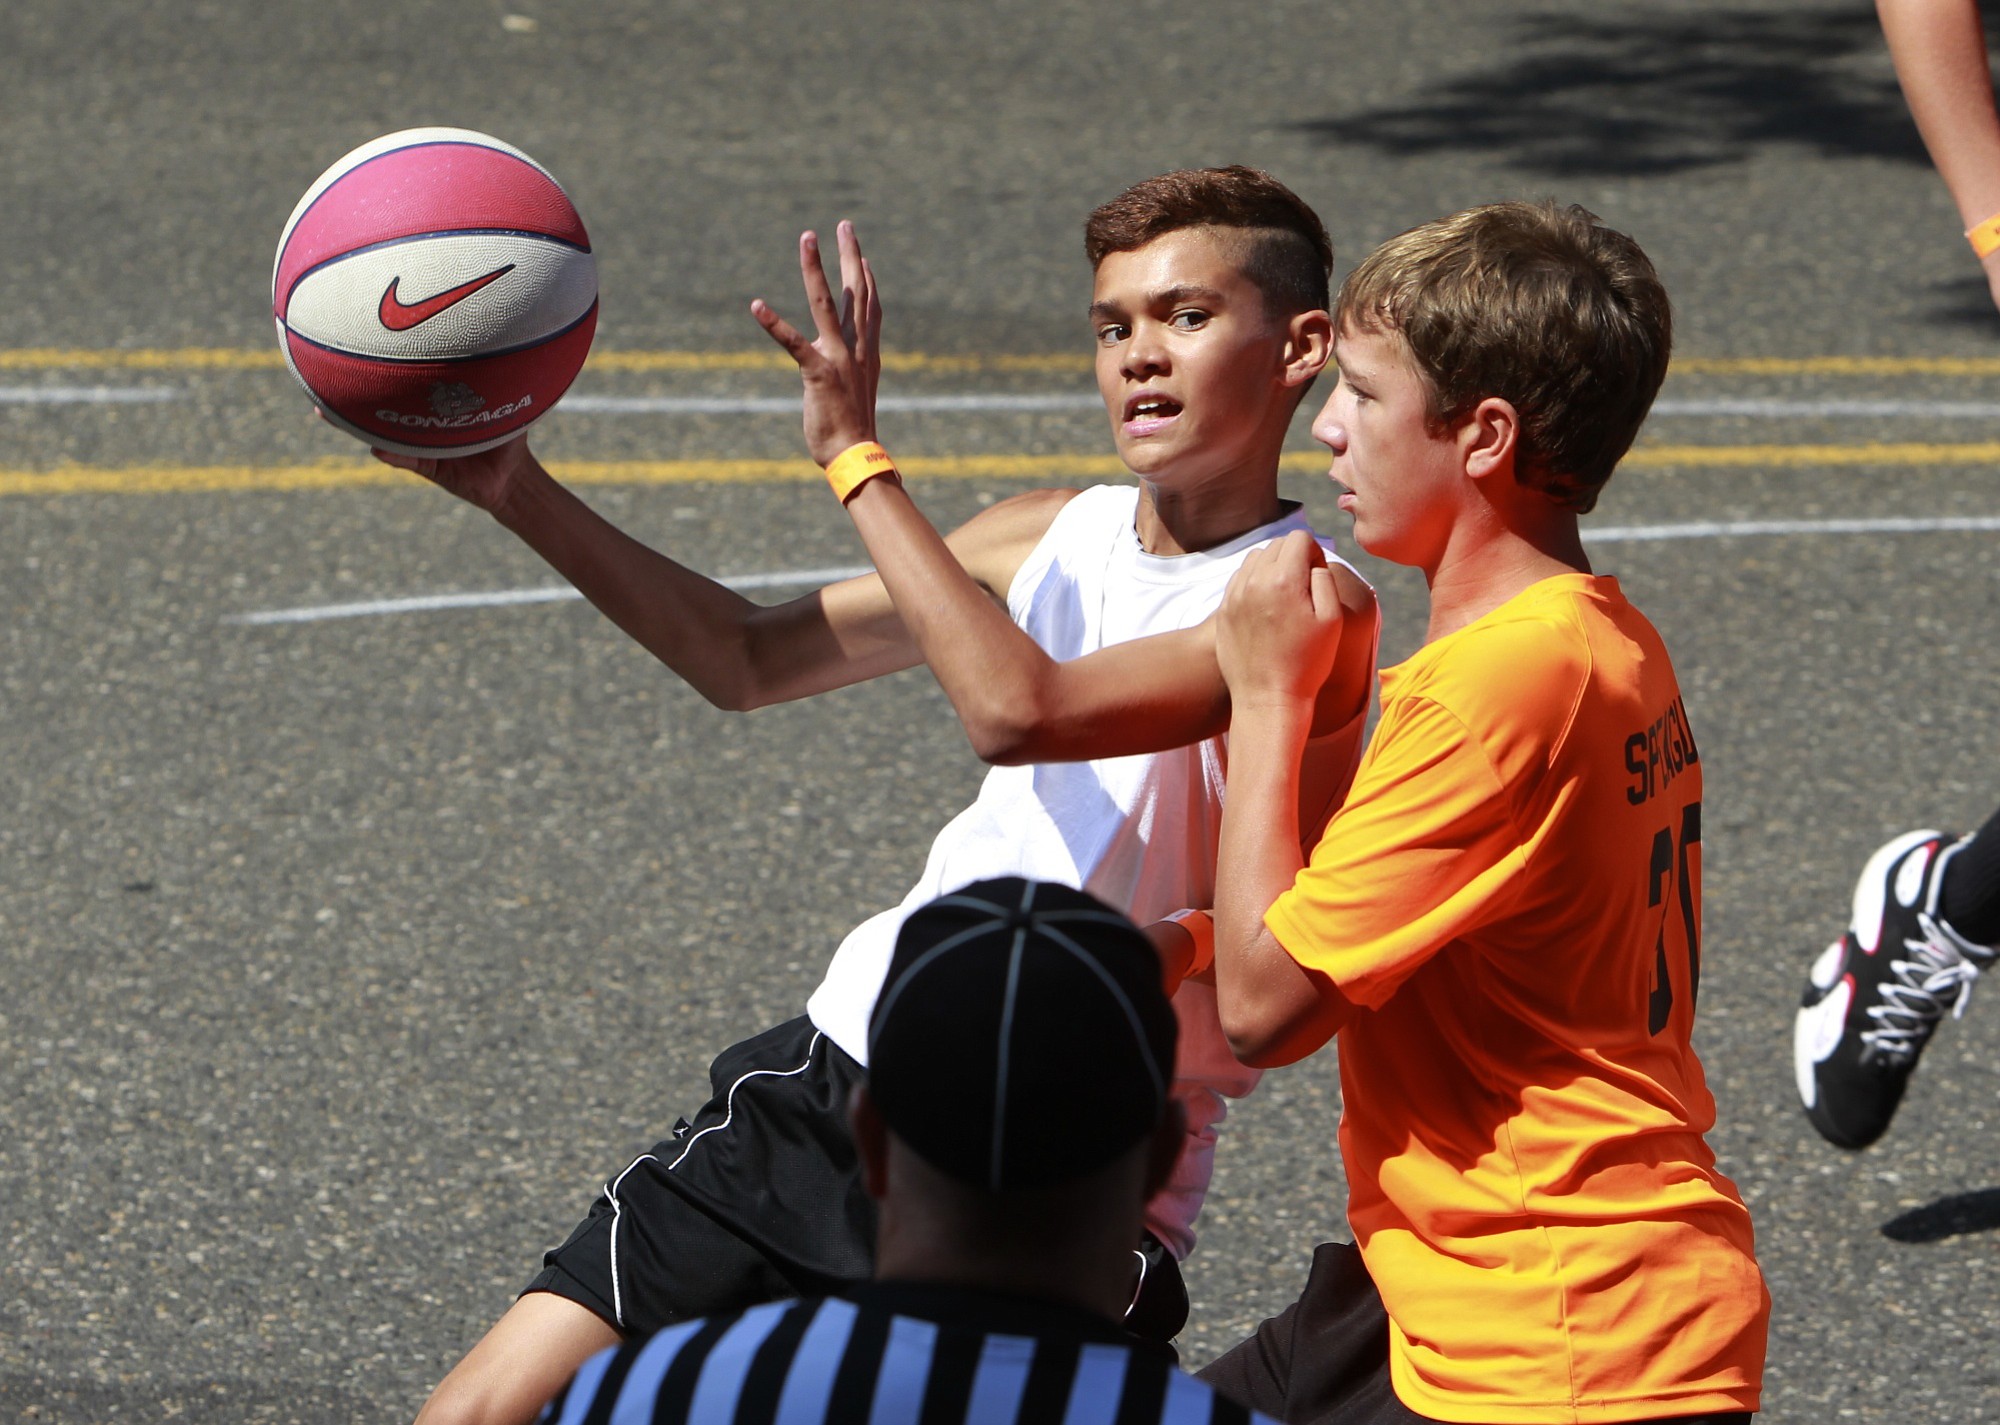 Kyri Greene, left, and Thomas Sprague, right, take part in the Hoops on the River basketball tournament on downtown Vancouver streets Saturday.